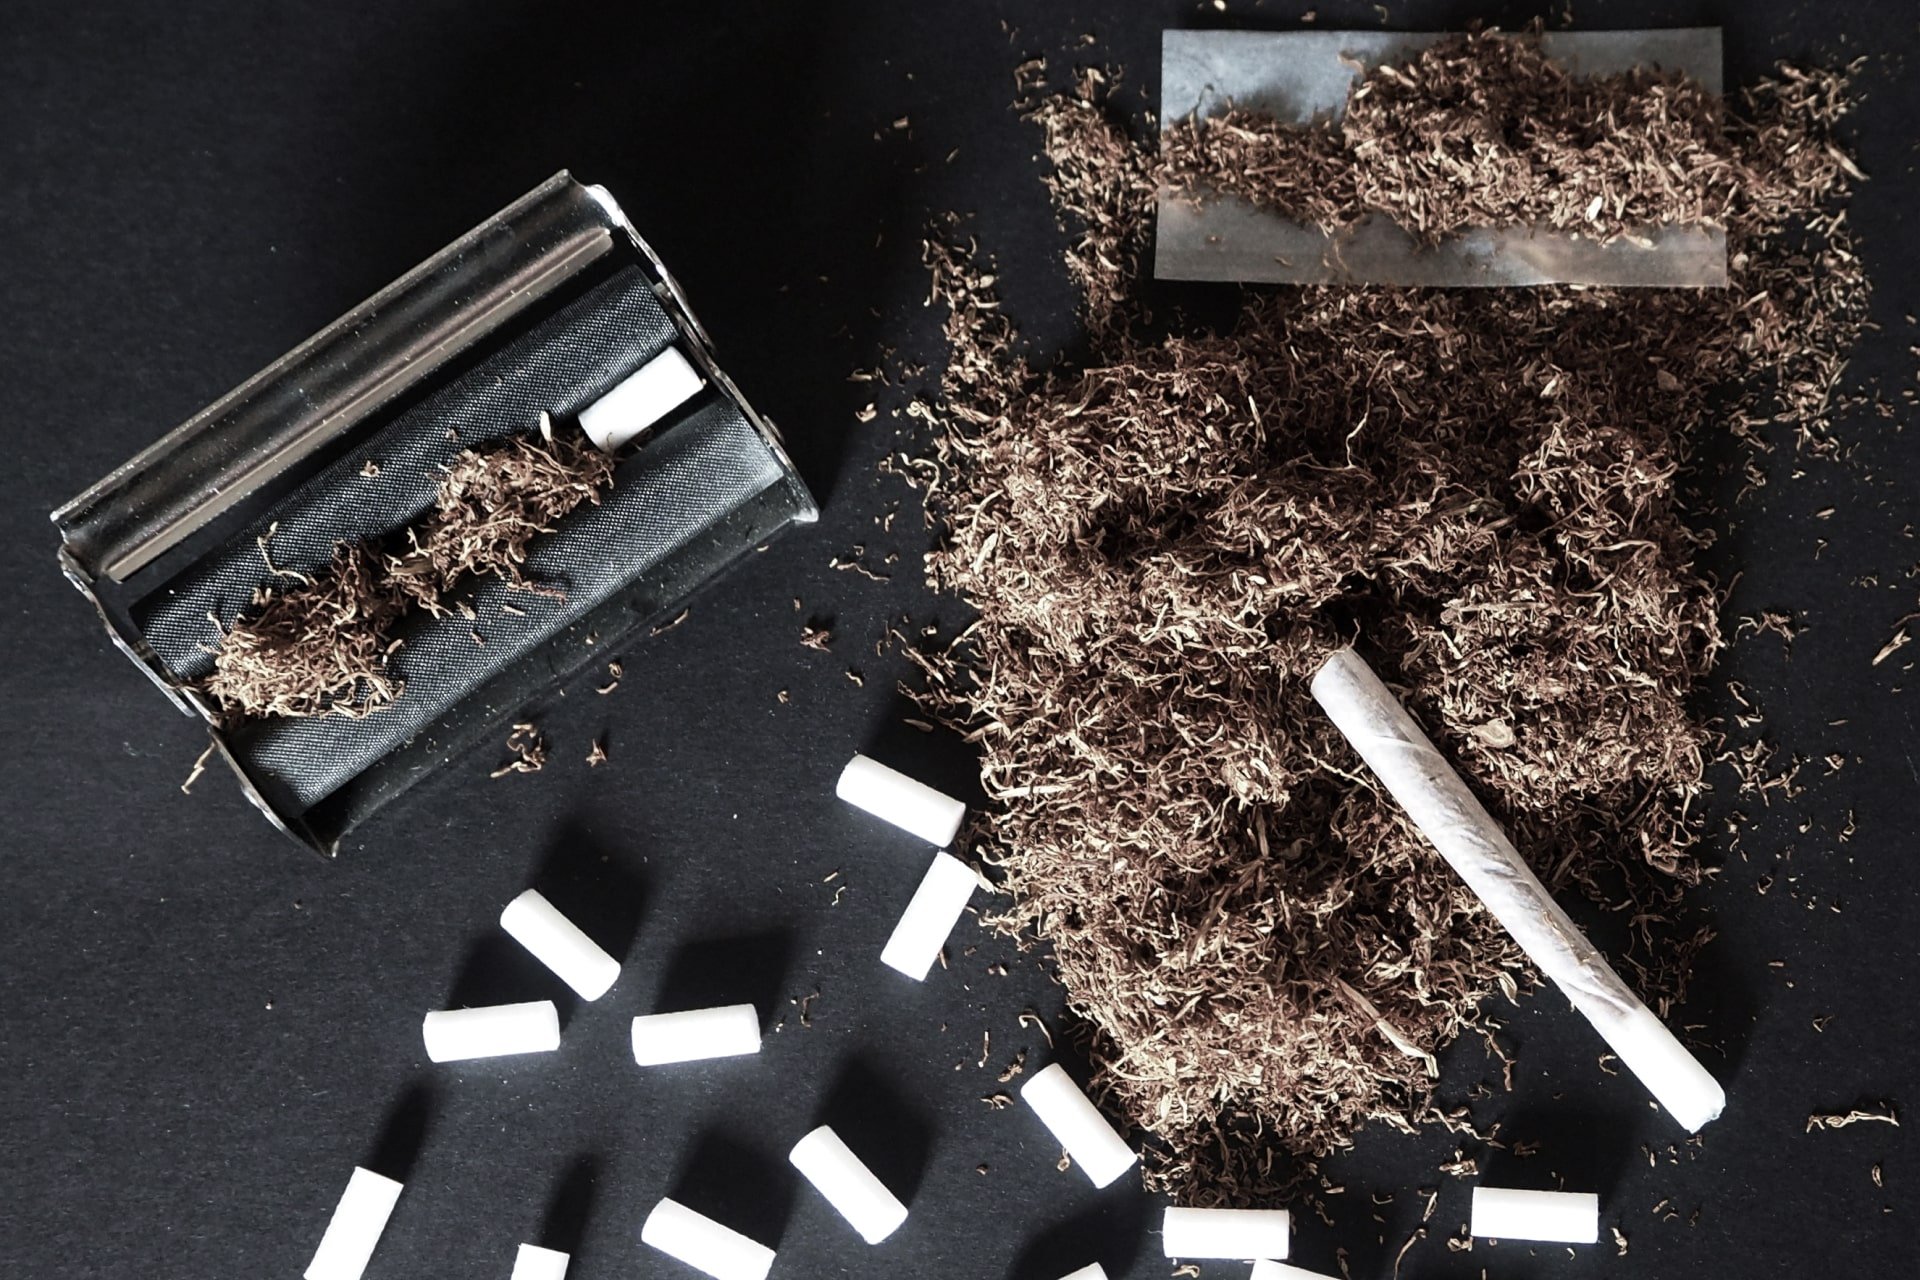 Tobacco products explained: What is Halfzware?